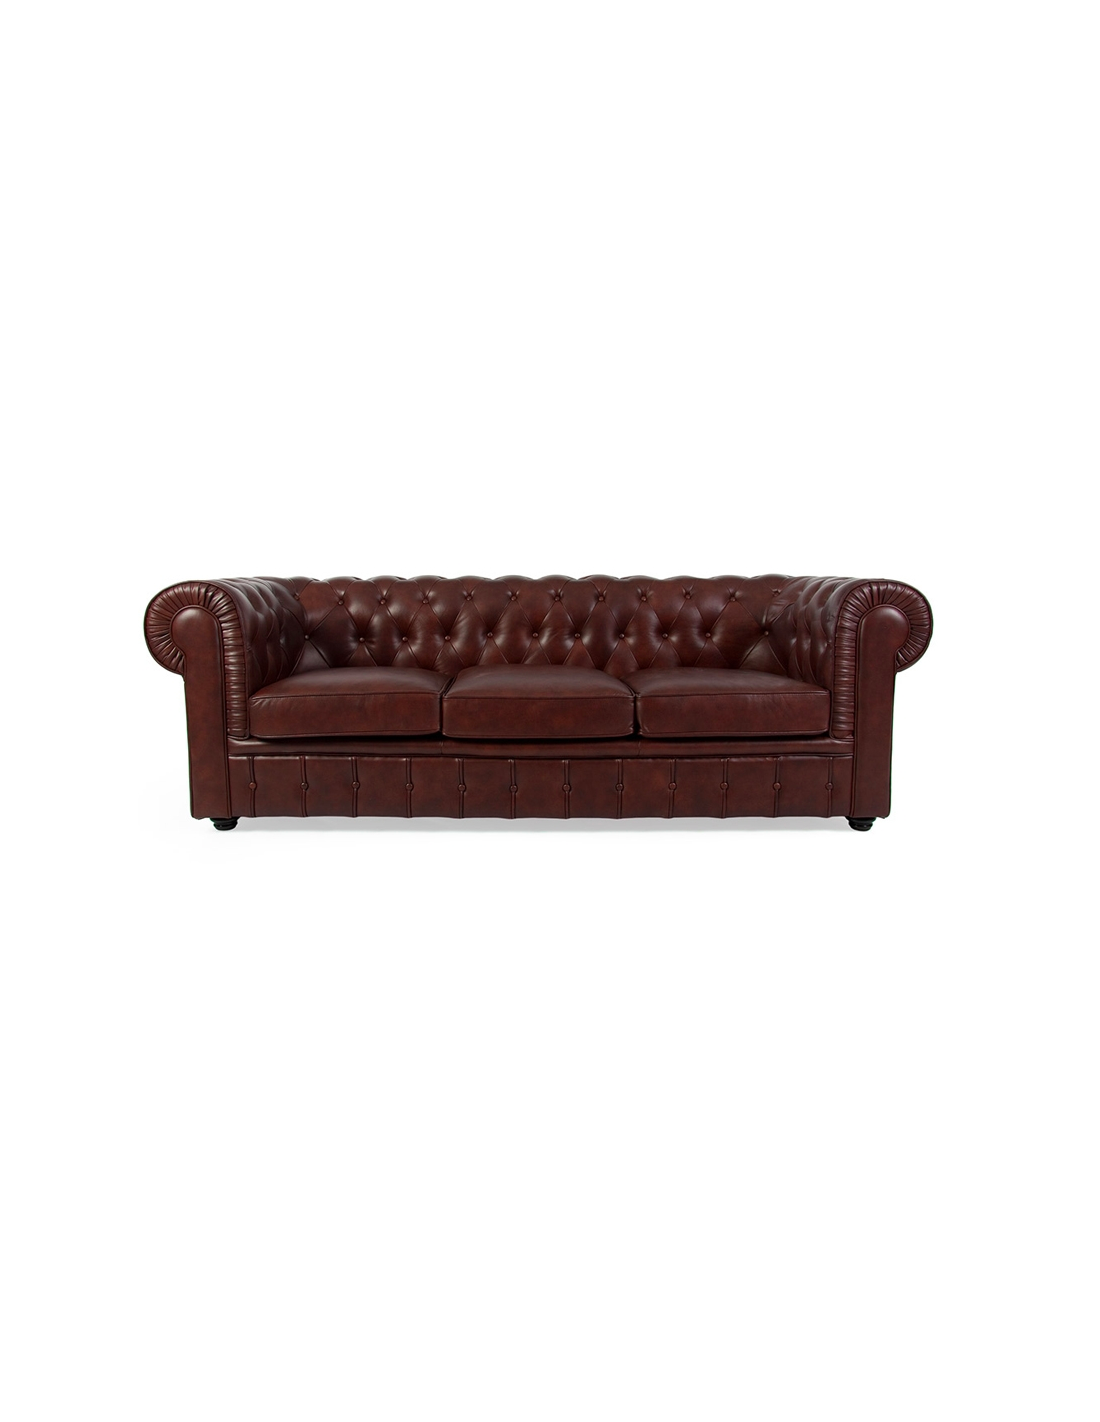 Three-Seater Chesterfield Sofa, 47% OFF